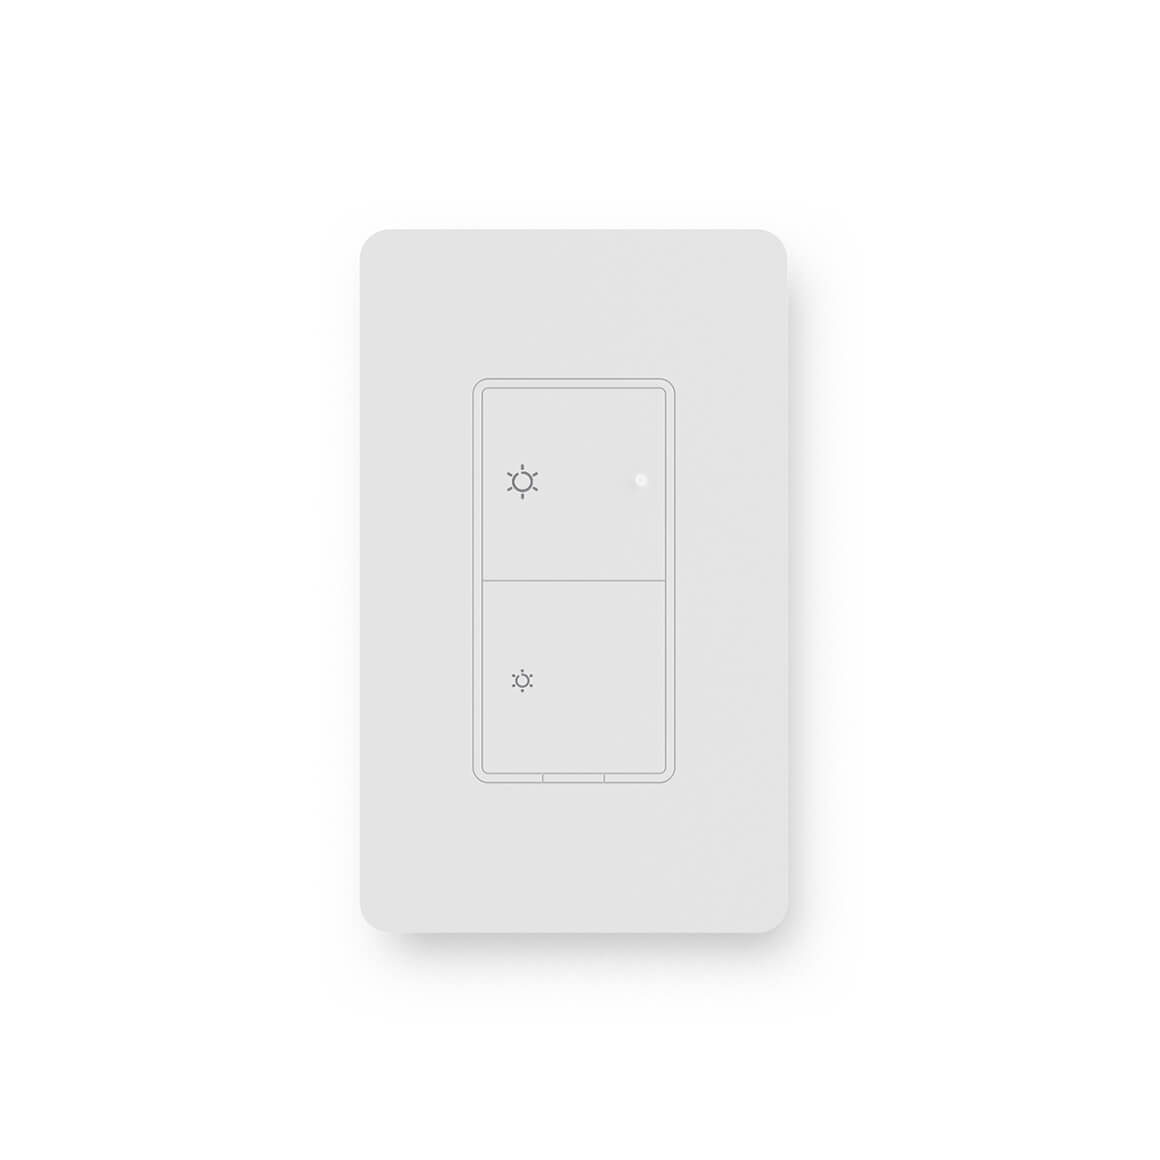 NA Dimmer Switch